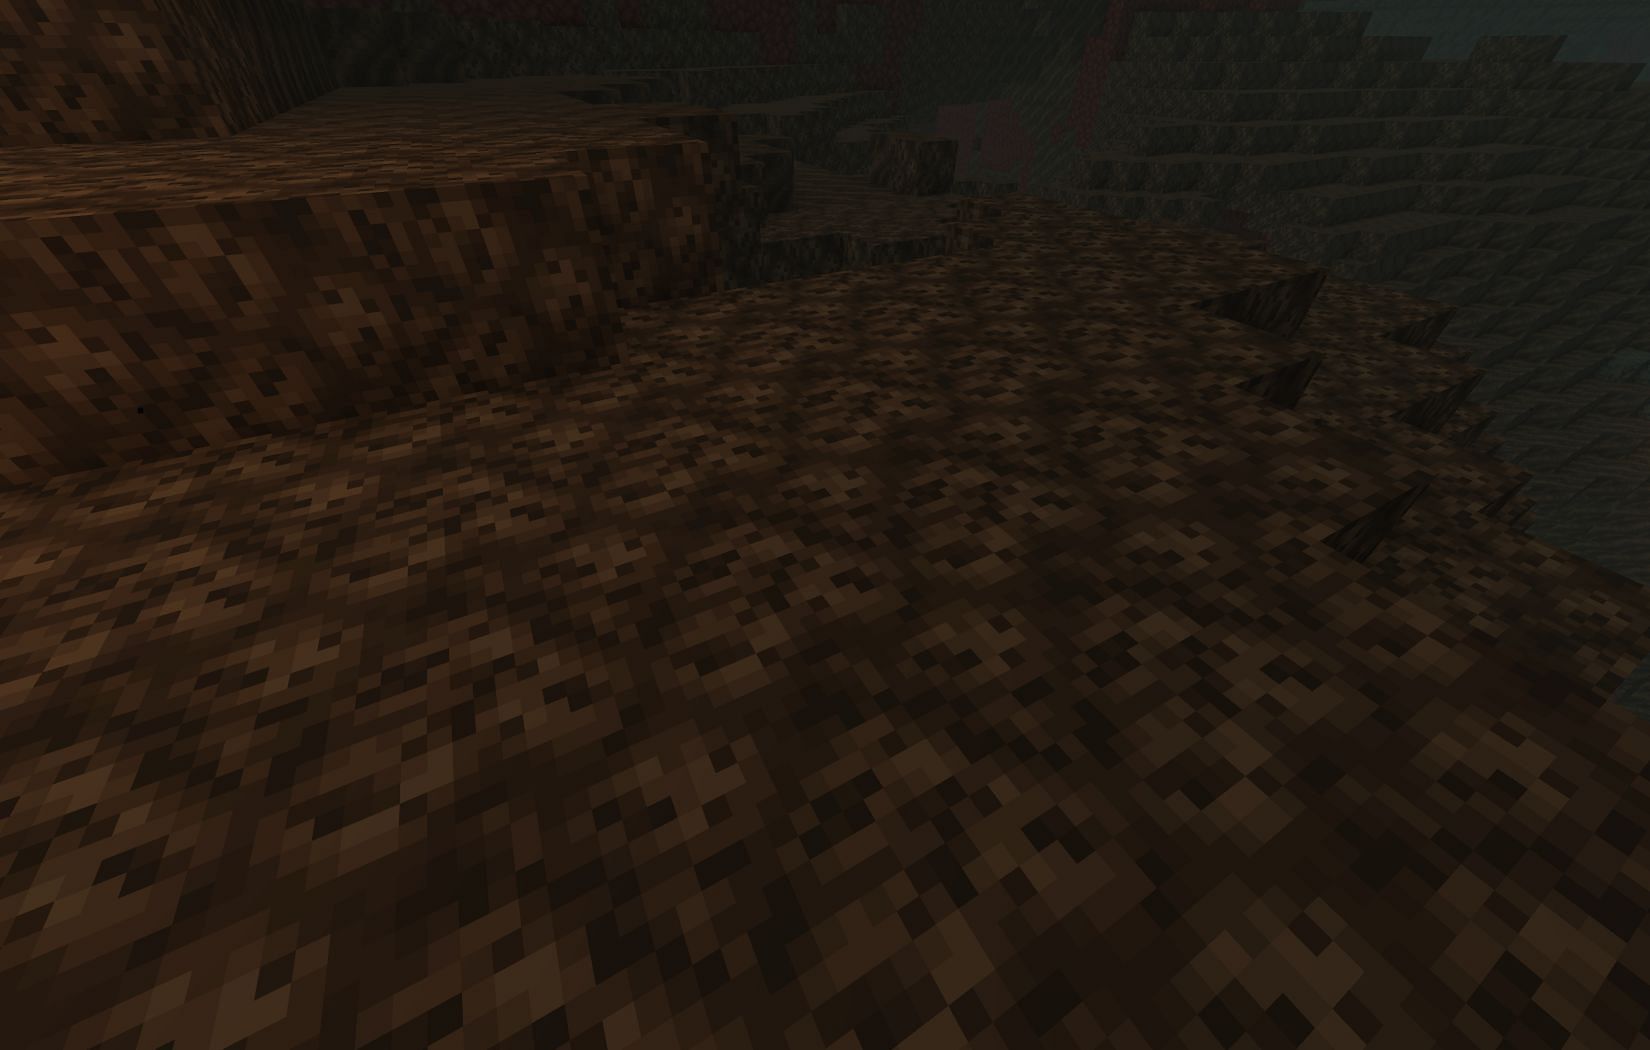 Soul sand can be found in the Nether (Image via Mojang)